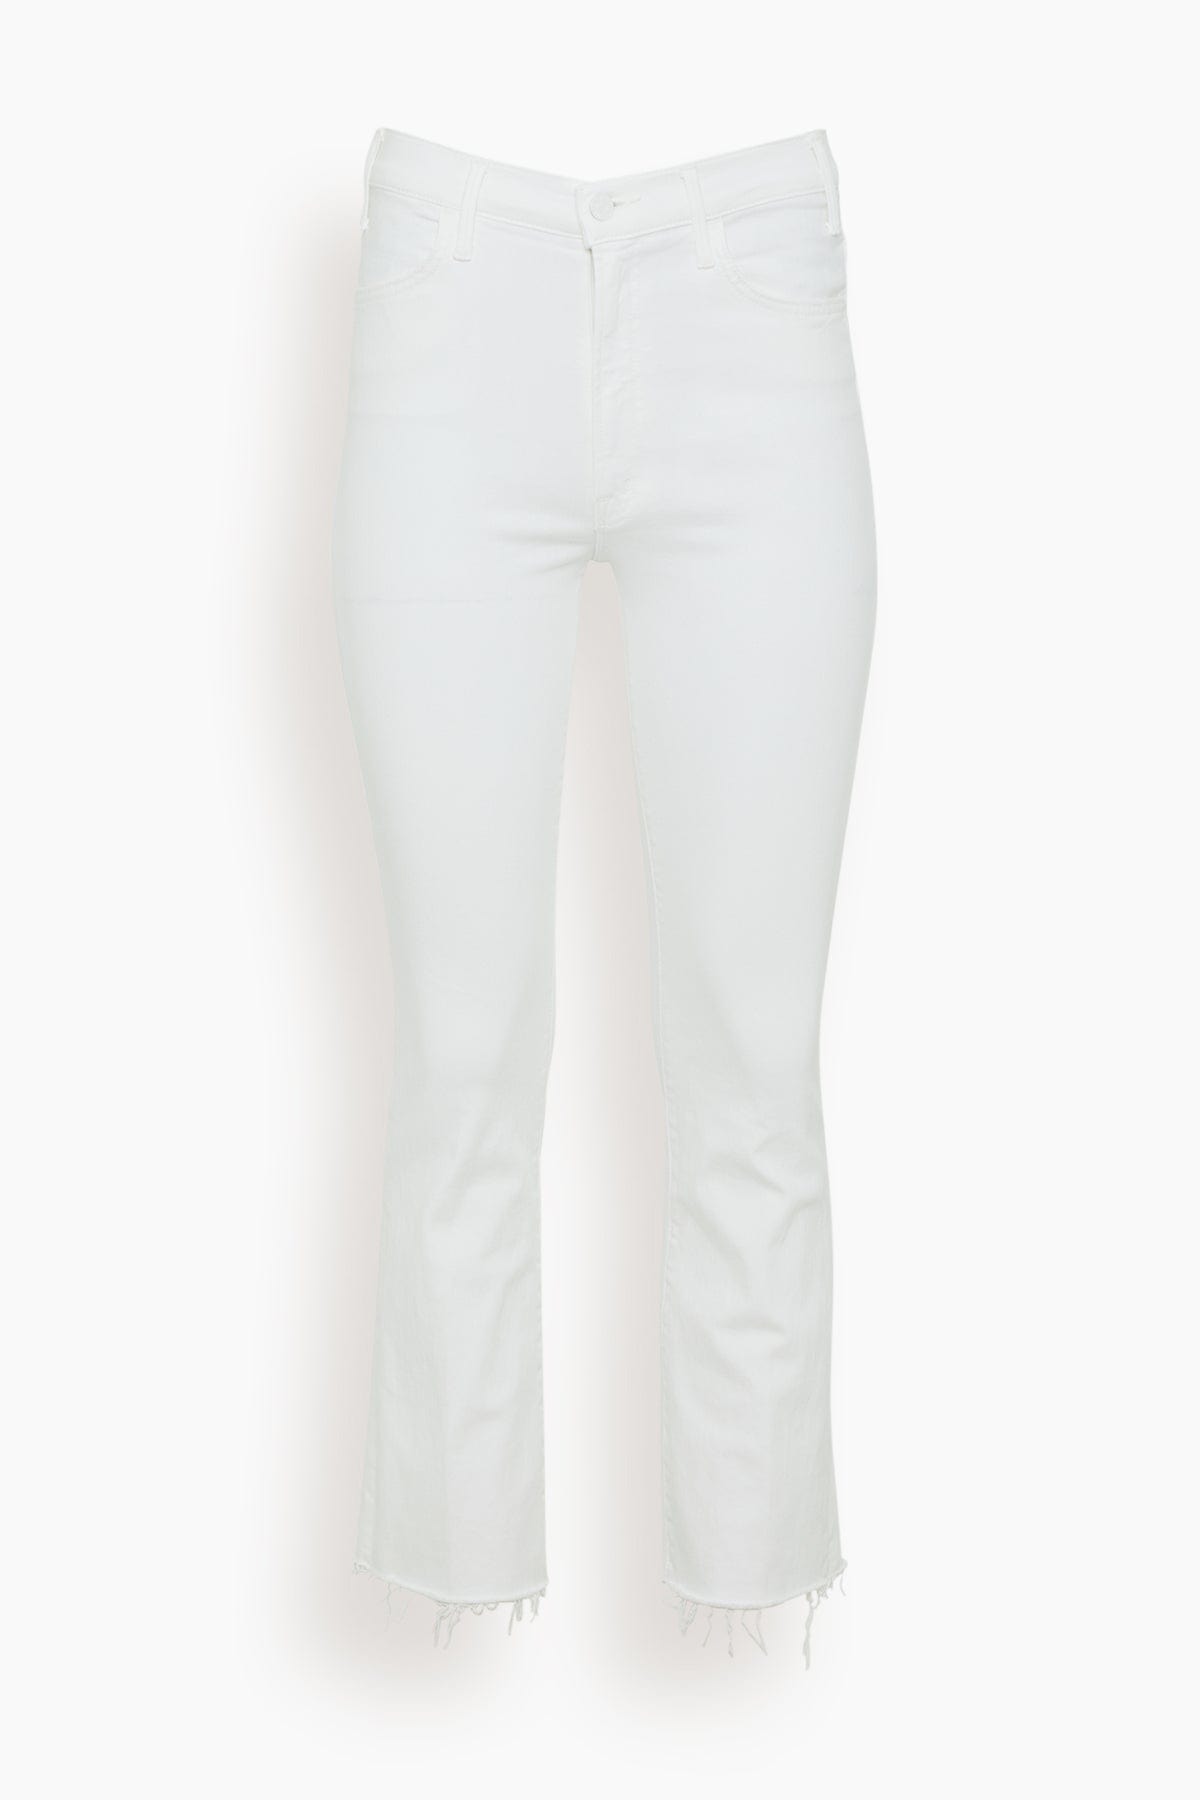 MOTHER The Hustler Ankle Fray Jean in Fairest of Them All - White - Size: 27